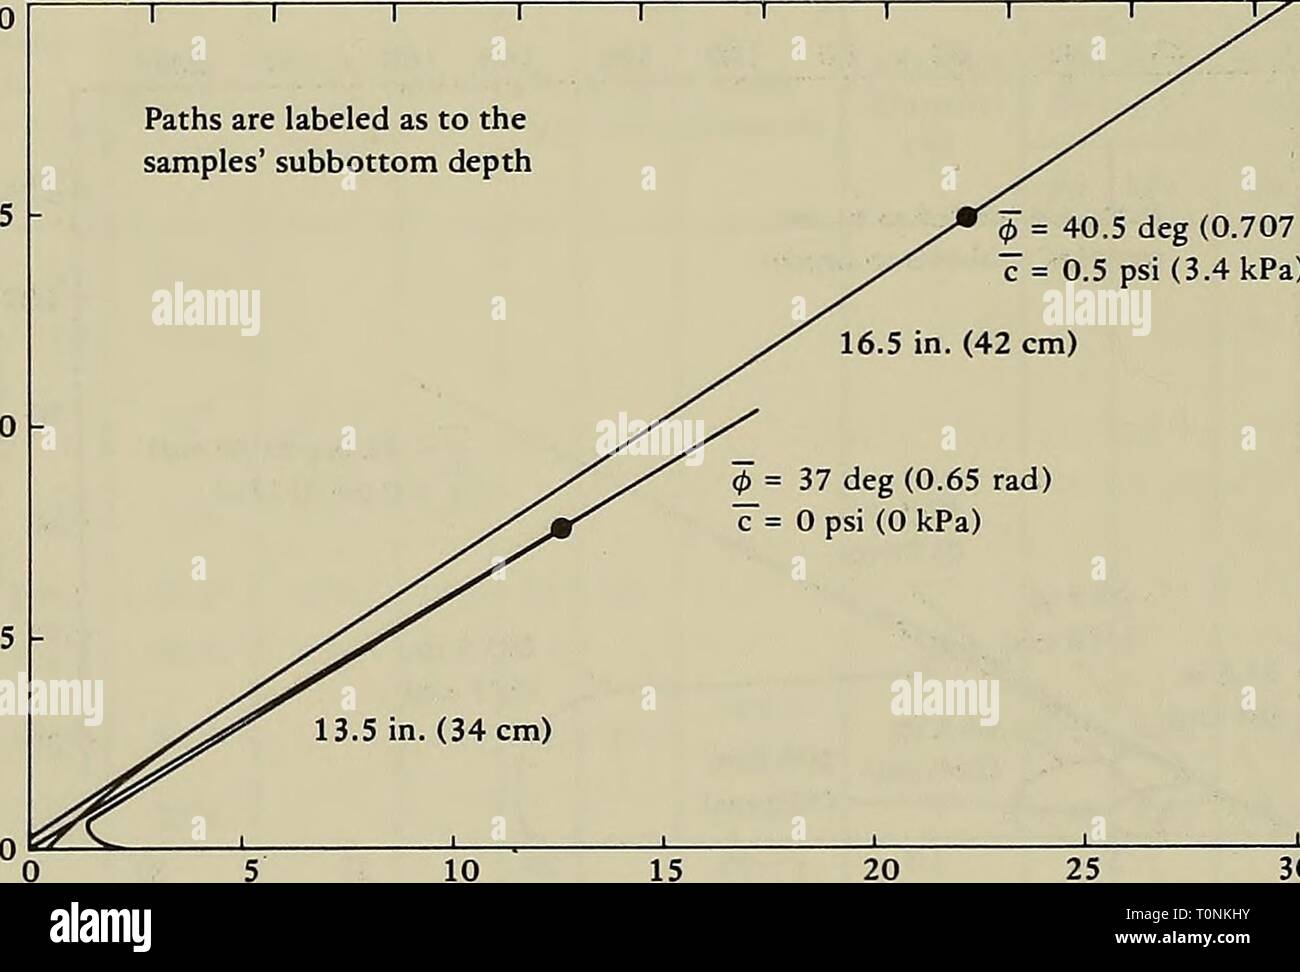 DOSIST II  an investigation DOSIST II : an investigation of the in-place strength behavior of marine sediments  dosistiiinvestig00leeh Year: 1976  (ct1 + ct3)/2 (psi) Figure 5. Triaxial test stress path diagram for silt from Site IV - cores D0S4B and 4D. (ffj + o3)/2 (kPa) 80 100 120 140 Paths are labeled as to the samples' subbottom depth 40.5 deg (0.707 rad). c = 0.5 psi (3.4 kPa)    60 3. 15 20 (oj + o3)/2 (psi) Figure 6. Triaxial test stress path diagram for sands from Site IV - cores D0S4B and 4D. 10 Stock Photo